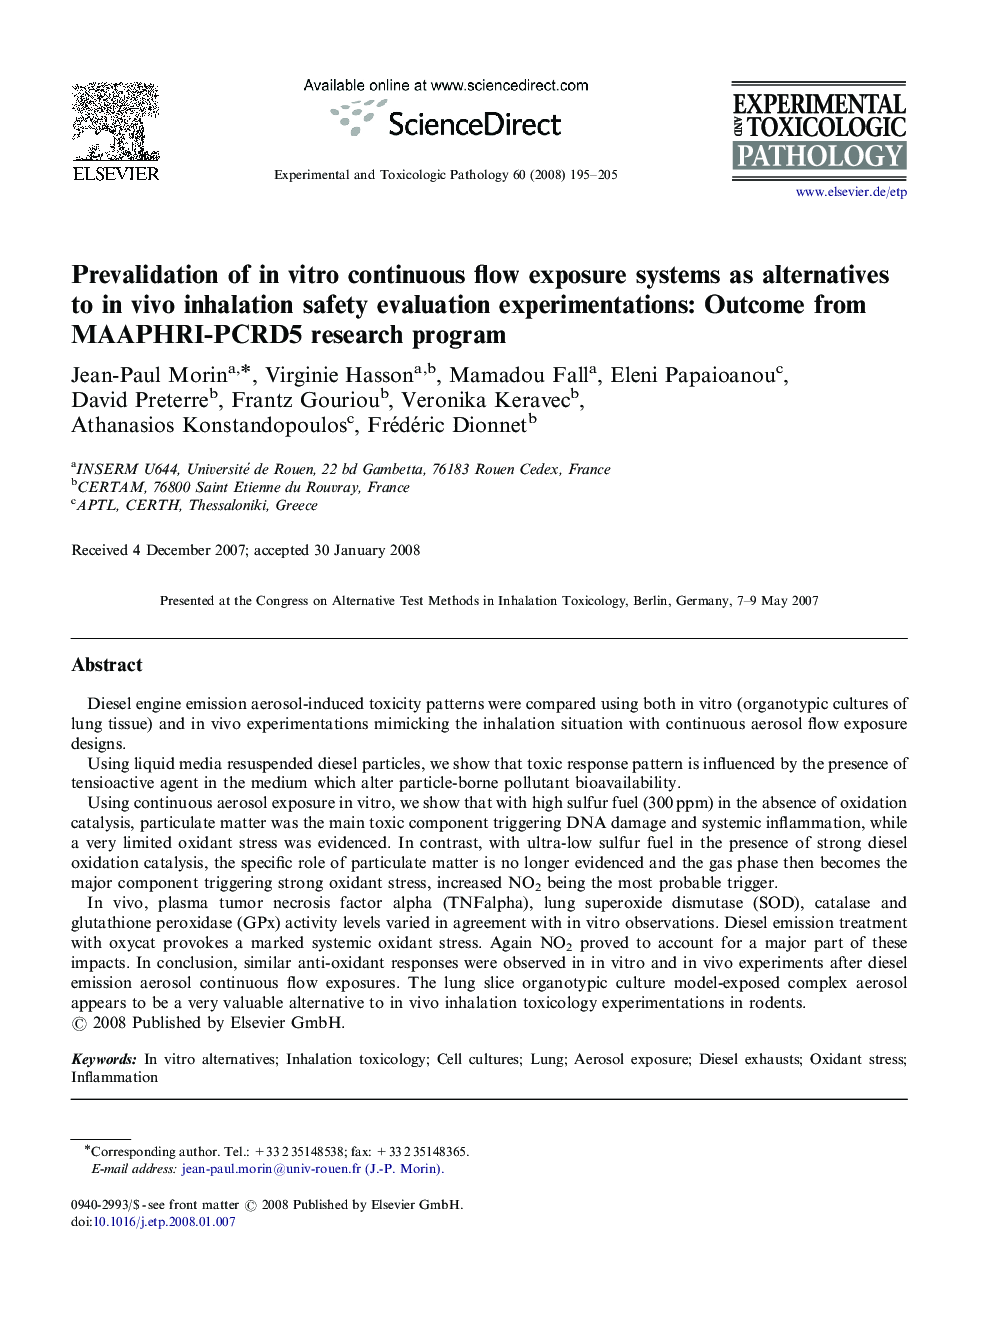 Prevalidation of in vitro continuous flow exposure systems as alternatives to in vivo inhalation safety evaluation experimentations: Outcome from MAAPHRI-PCRD5 research program